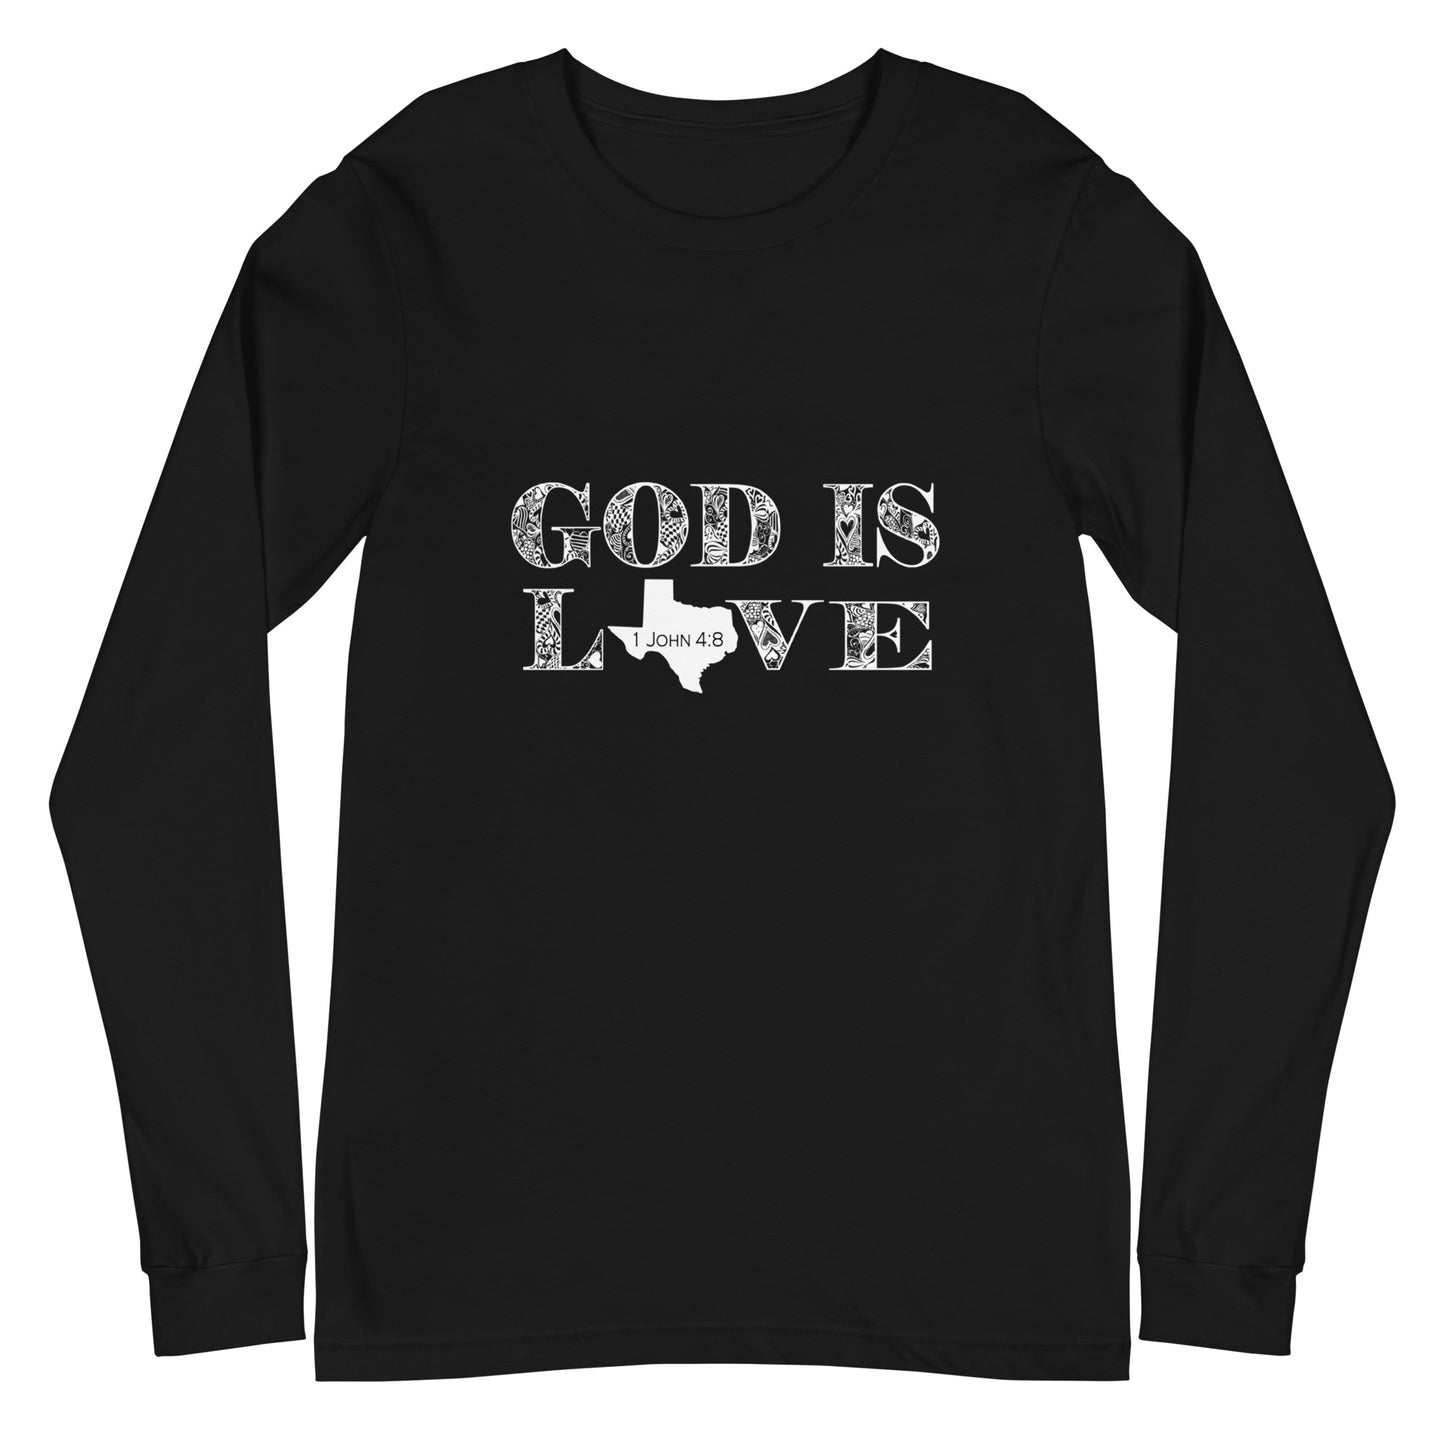 Graphic Christian black long-sleeve tee with 1 John 4:8 on it. This piece of Christian apparel is a reminder of who God is. Grab this unique long-sleeve tee from the Christian-based company Olive Grove Life.